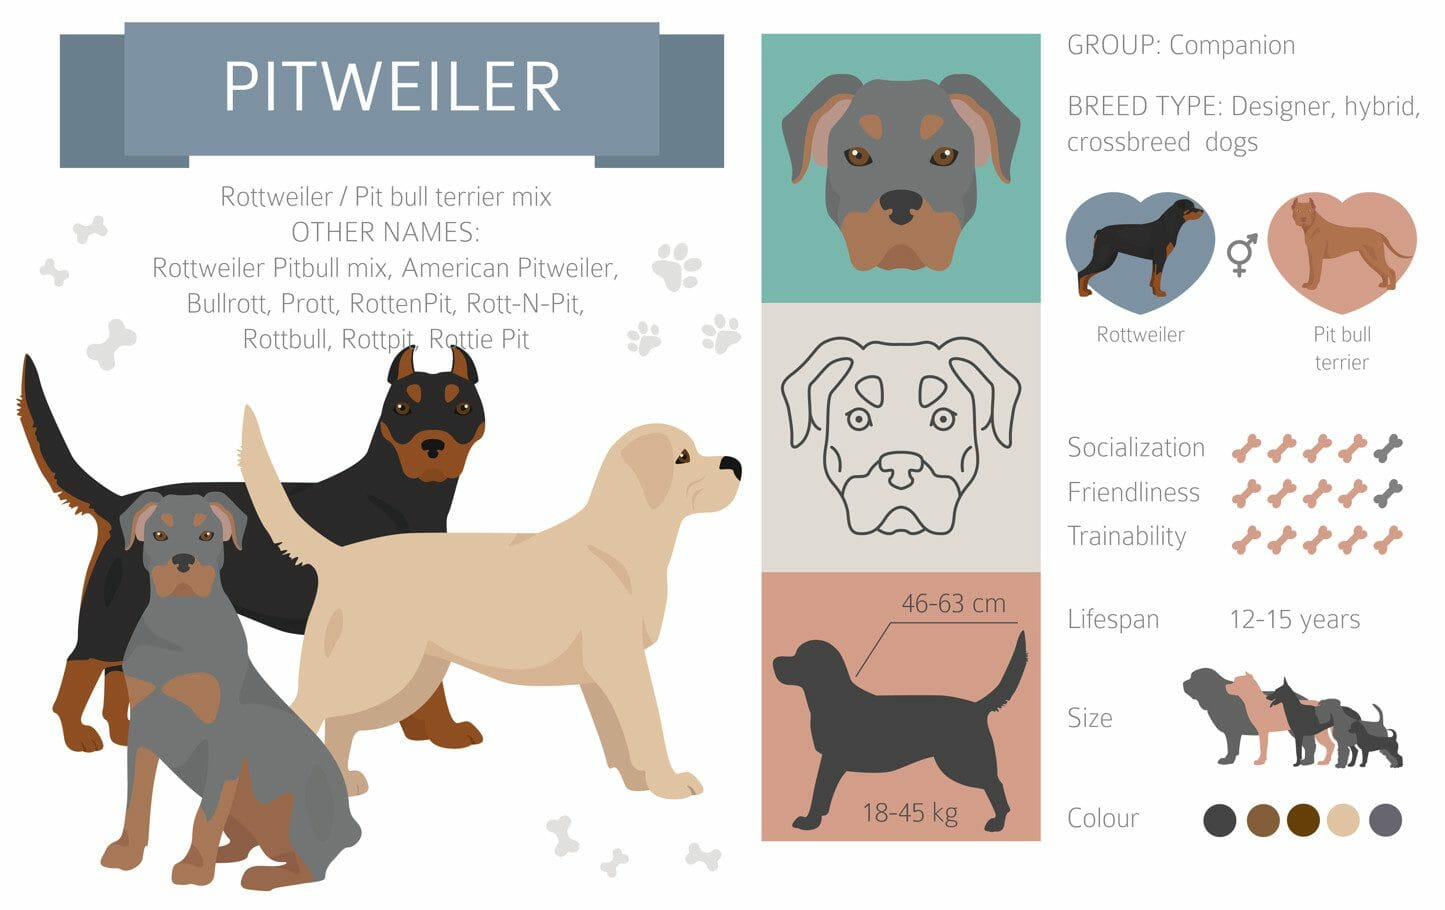 rottweiler pitbull mix - pitweilers